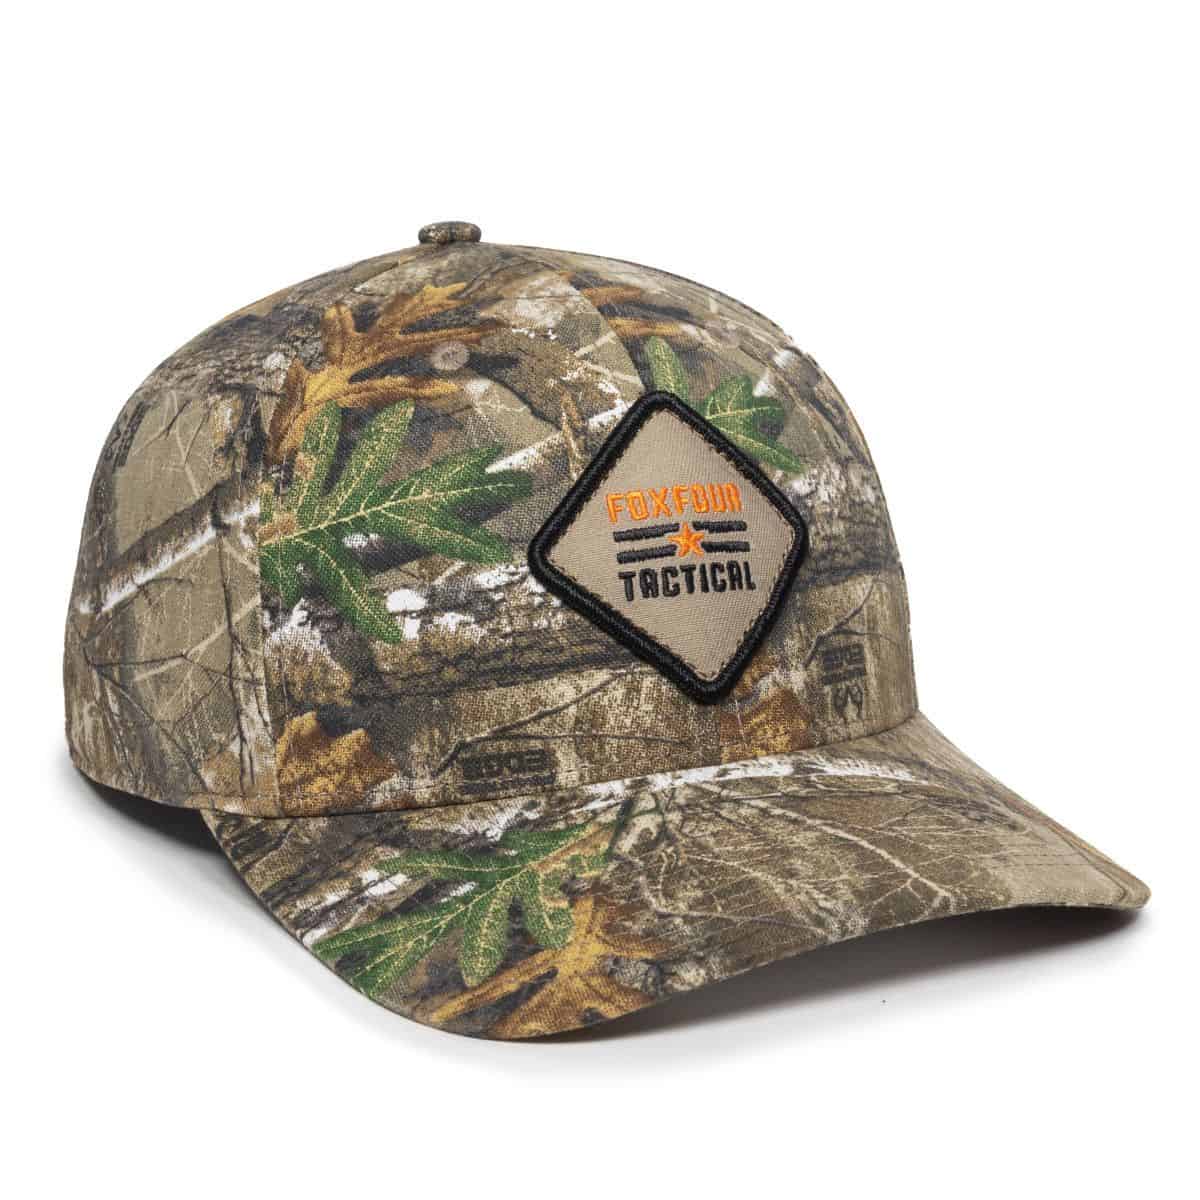 Custom Camo Hats Embroidered With Your Design - Consolidated Ink